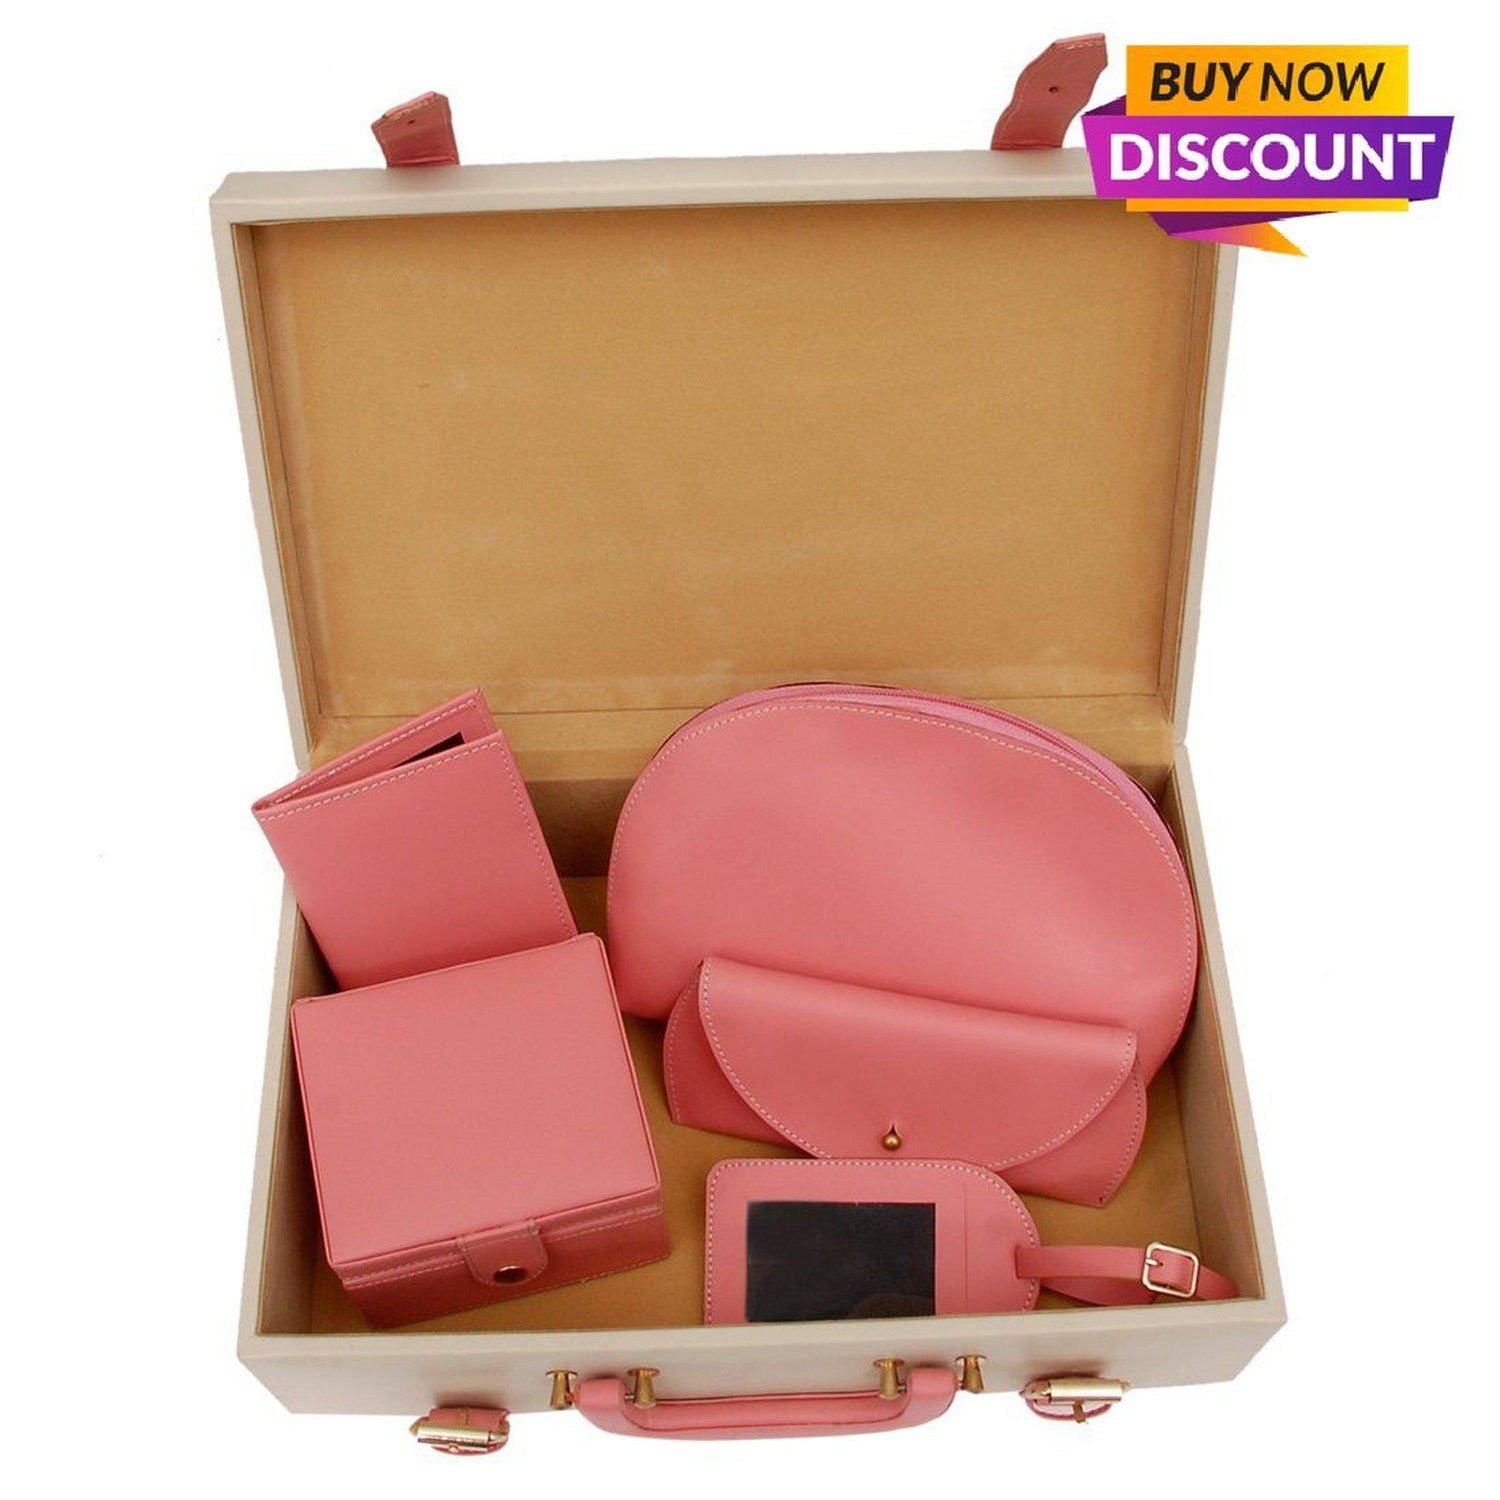 Leather Trunk Box for Women-Gift Set-ONESKYSHOP